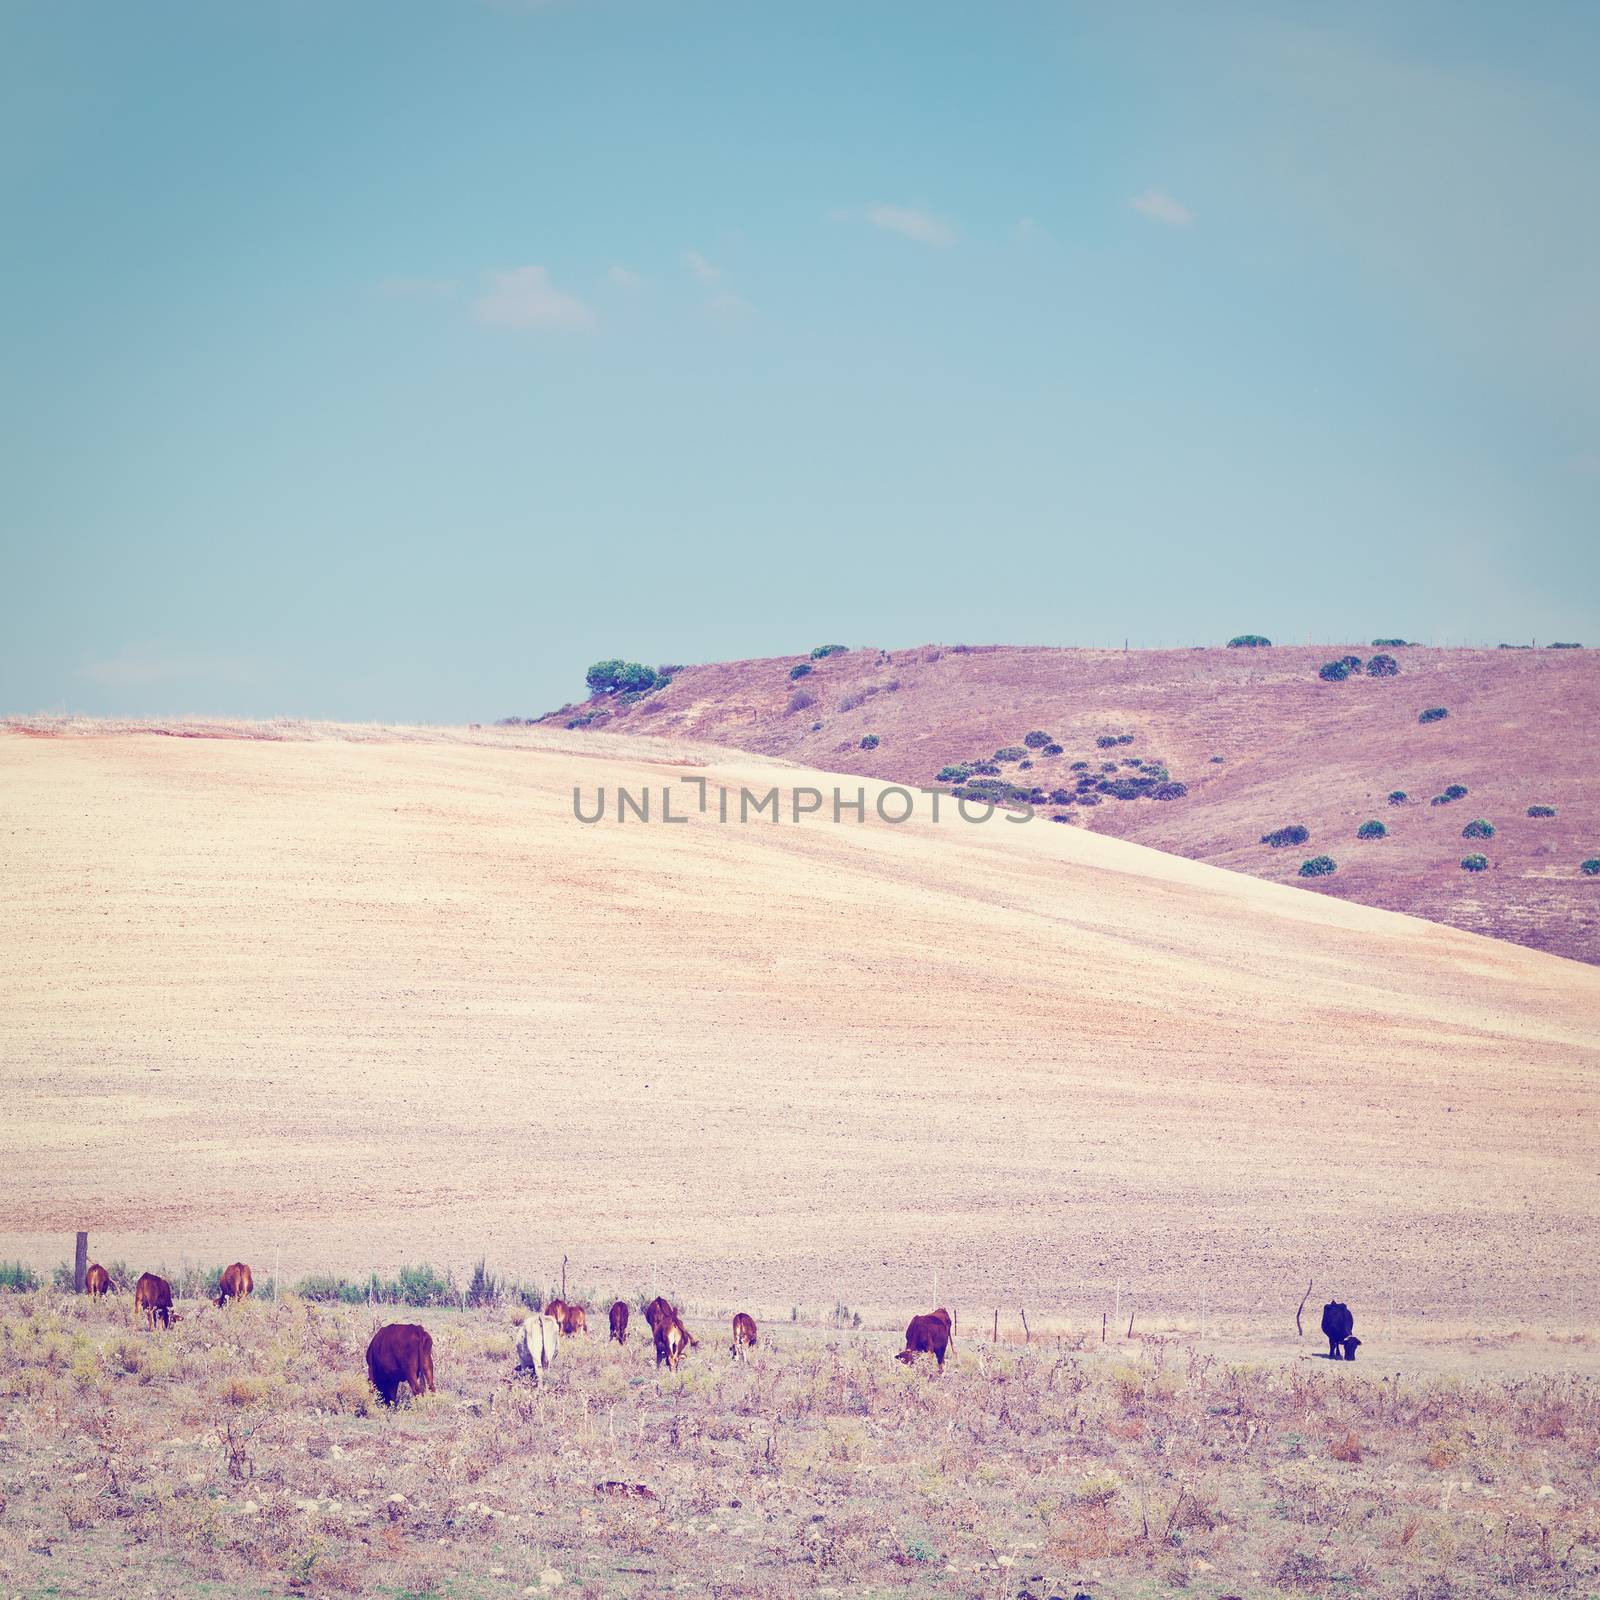 Pasture with Grazing Cows on the Background of Plowed Fields in Spain, Instagram Effect